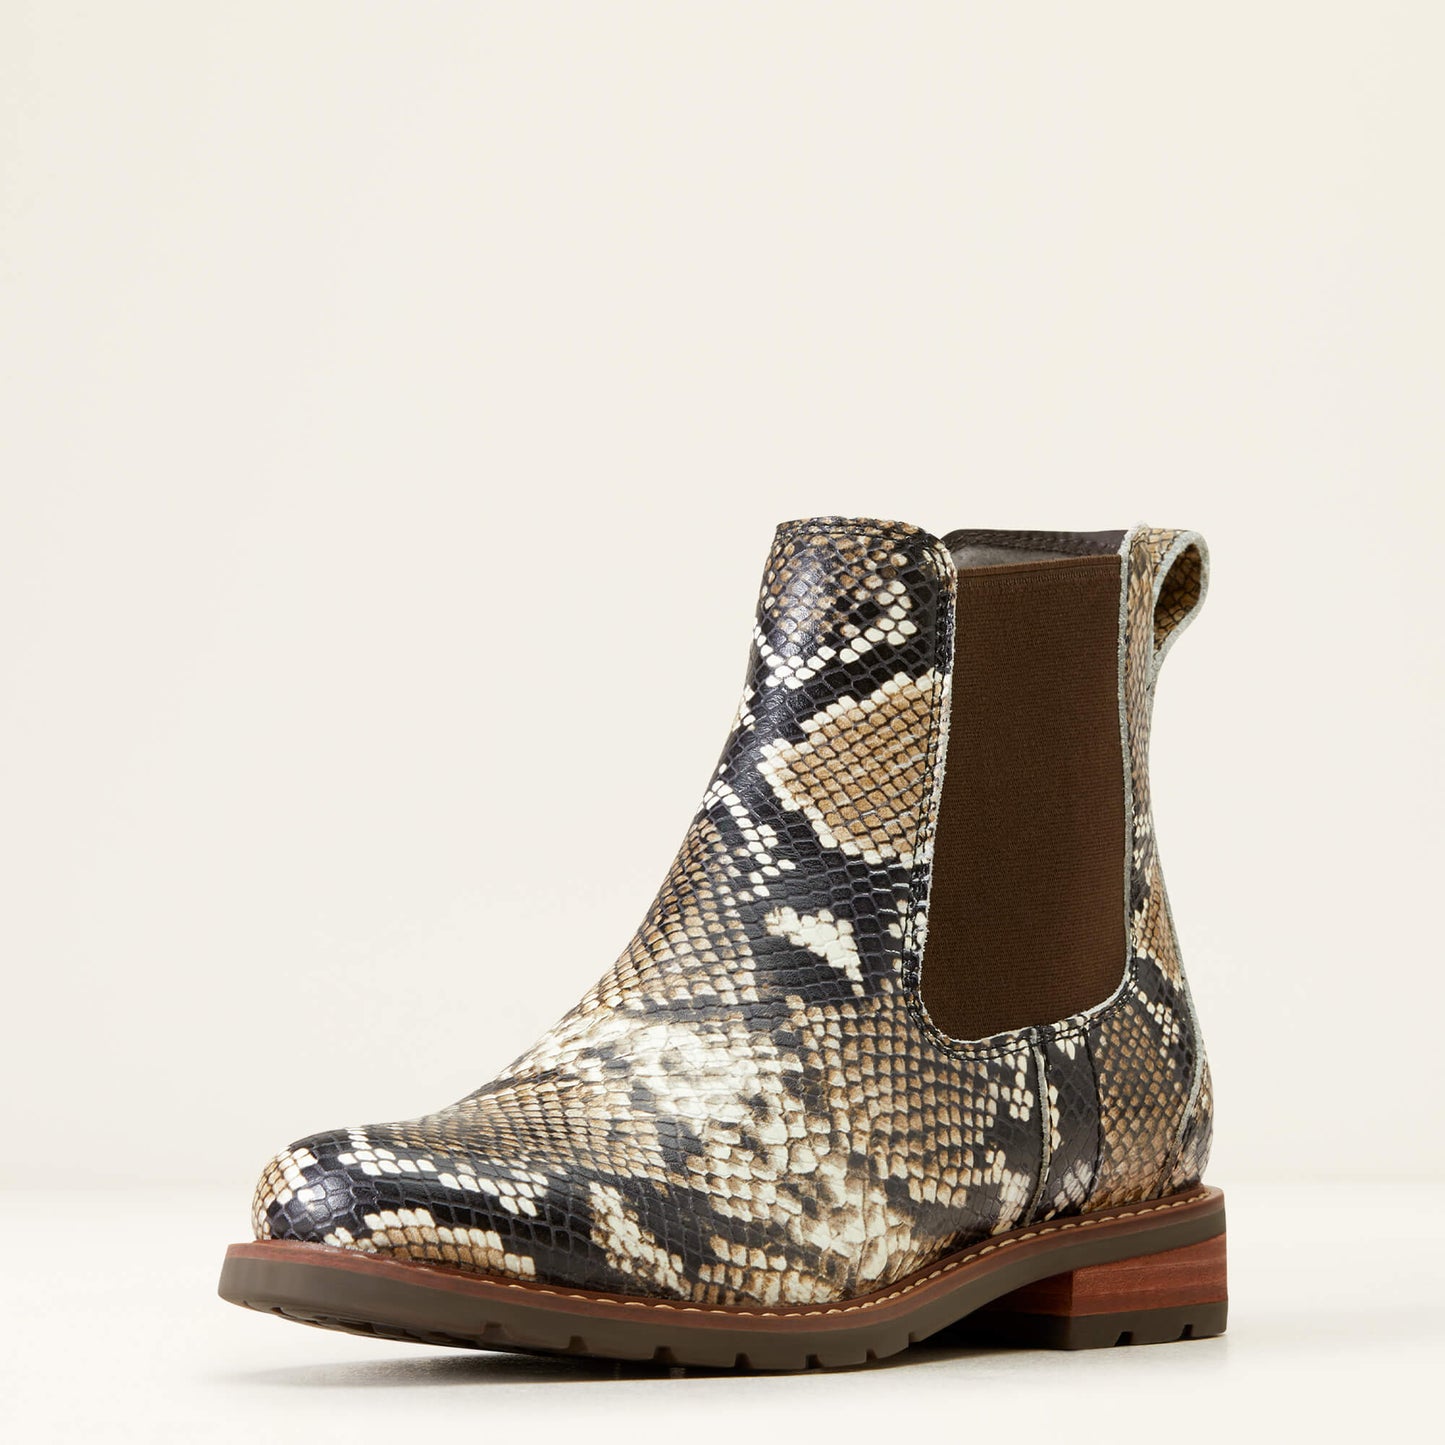 ARIAT WOMEN'S Style No. 10046975 Wexford Boot SNAKE PRINT